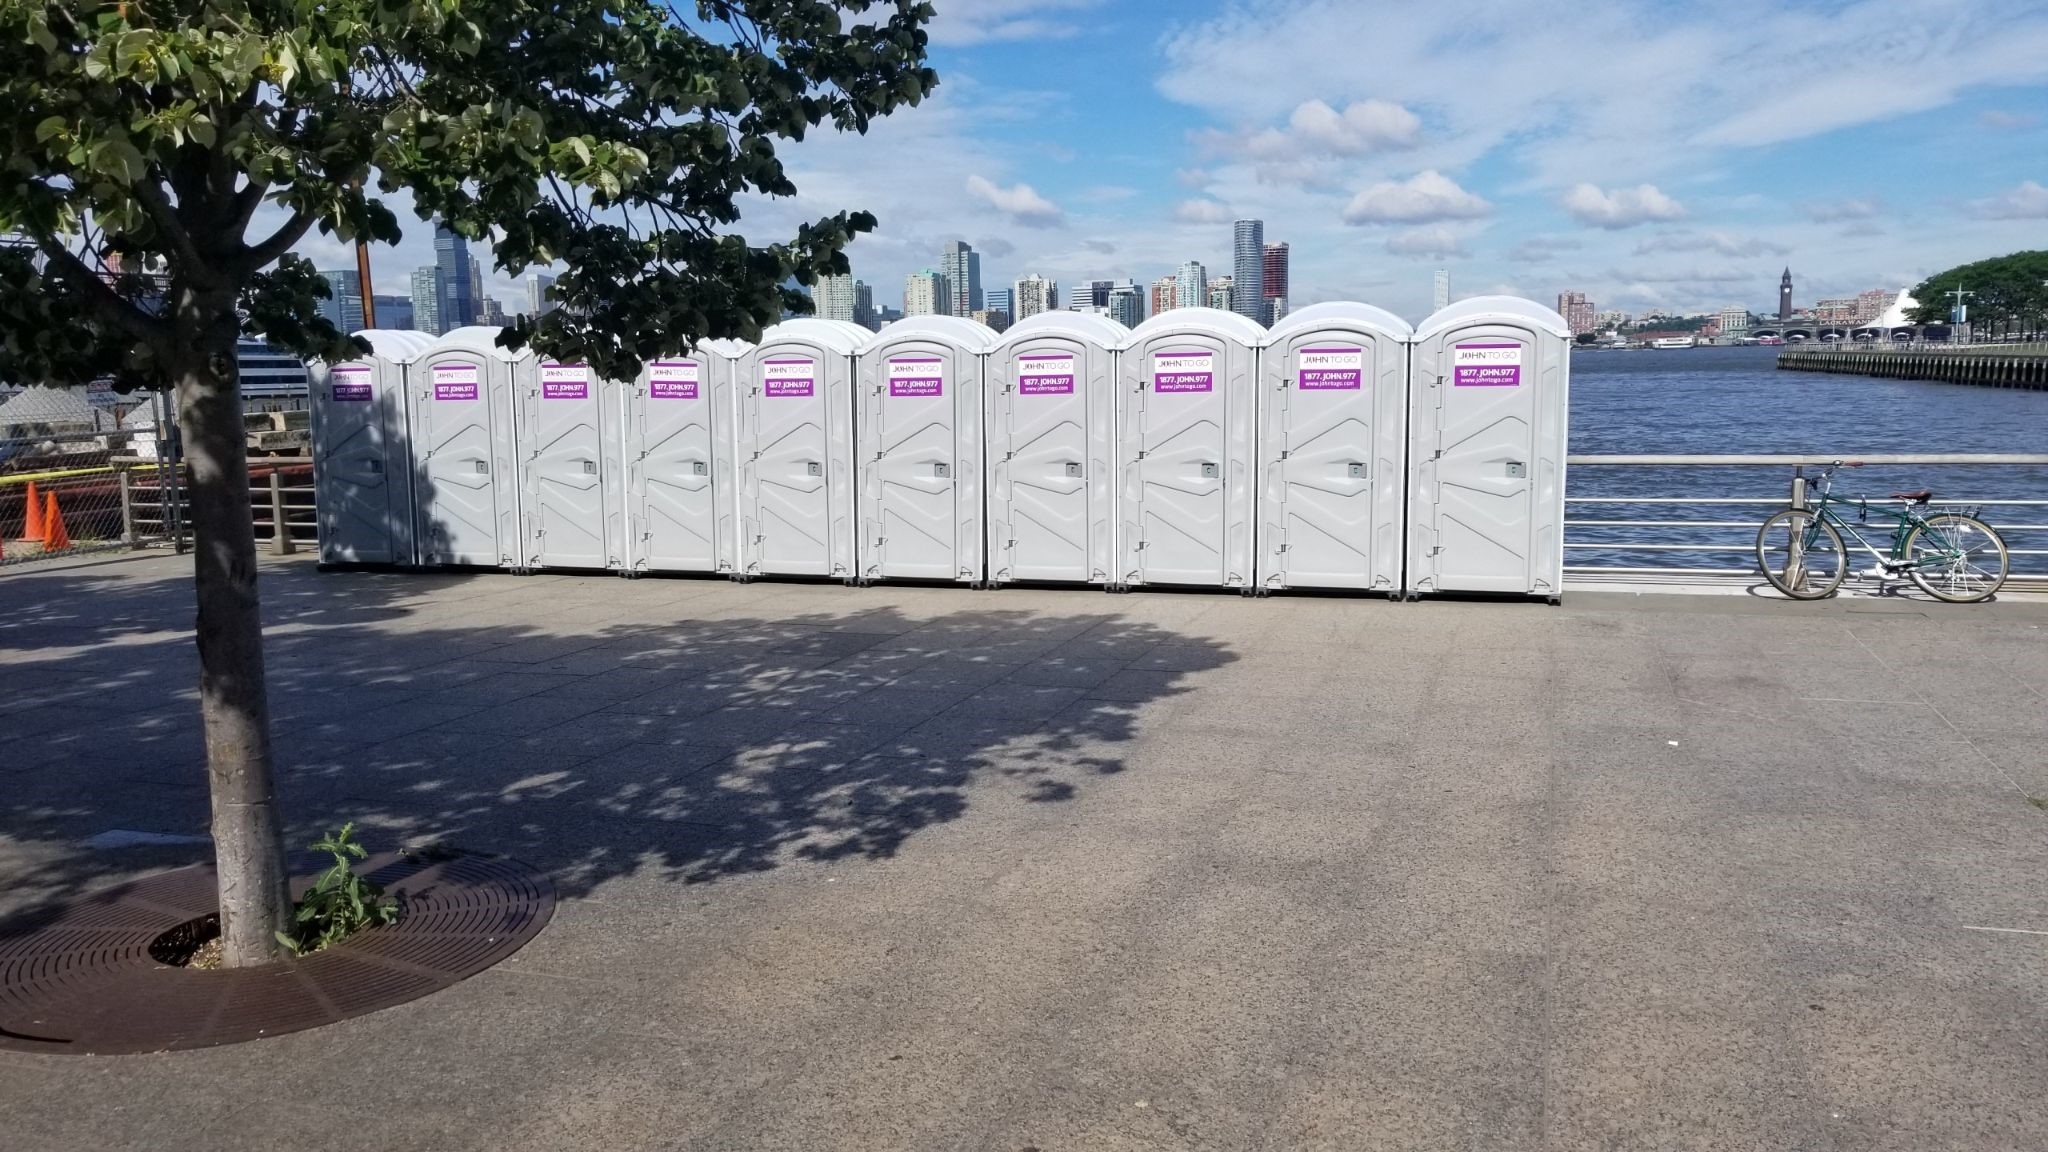 Mobile toilets at event next to water